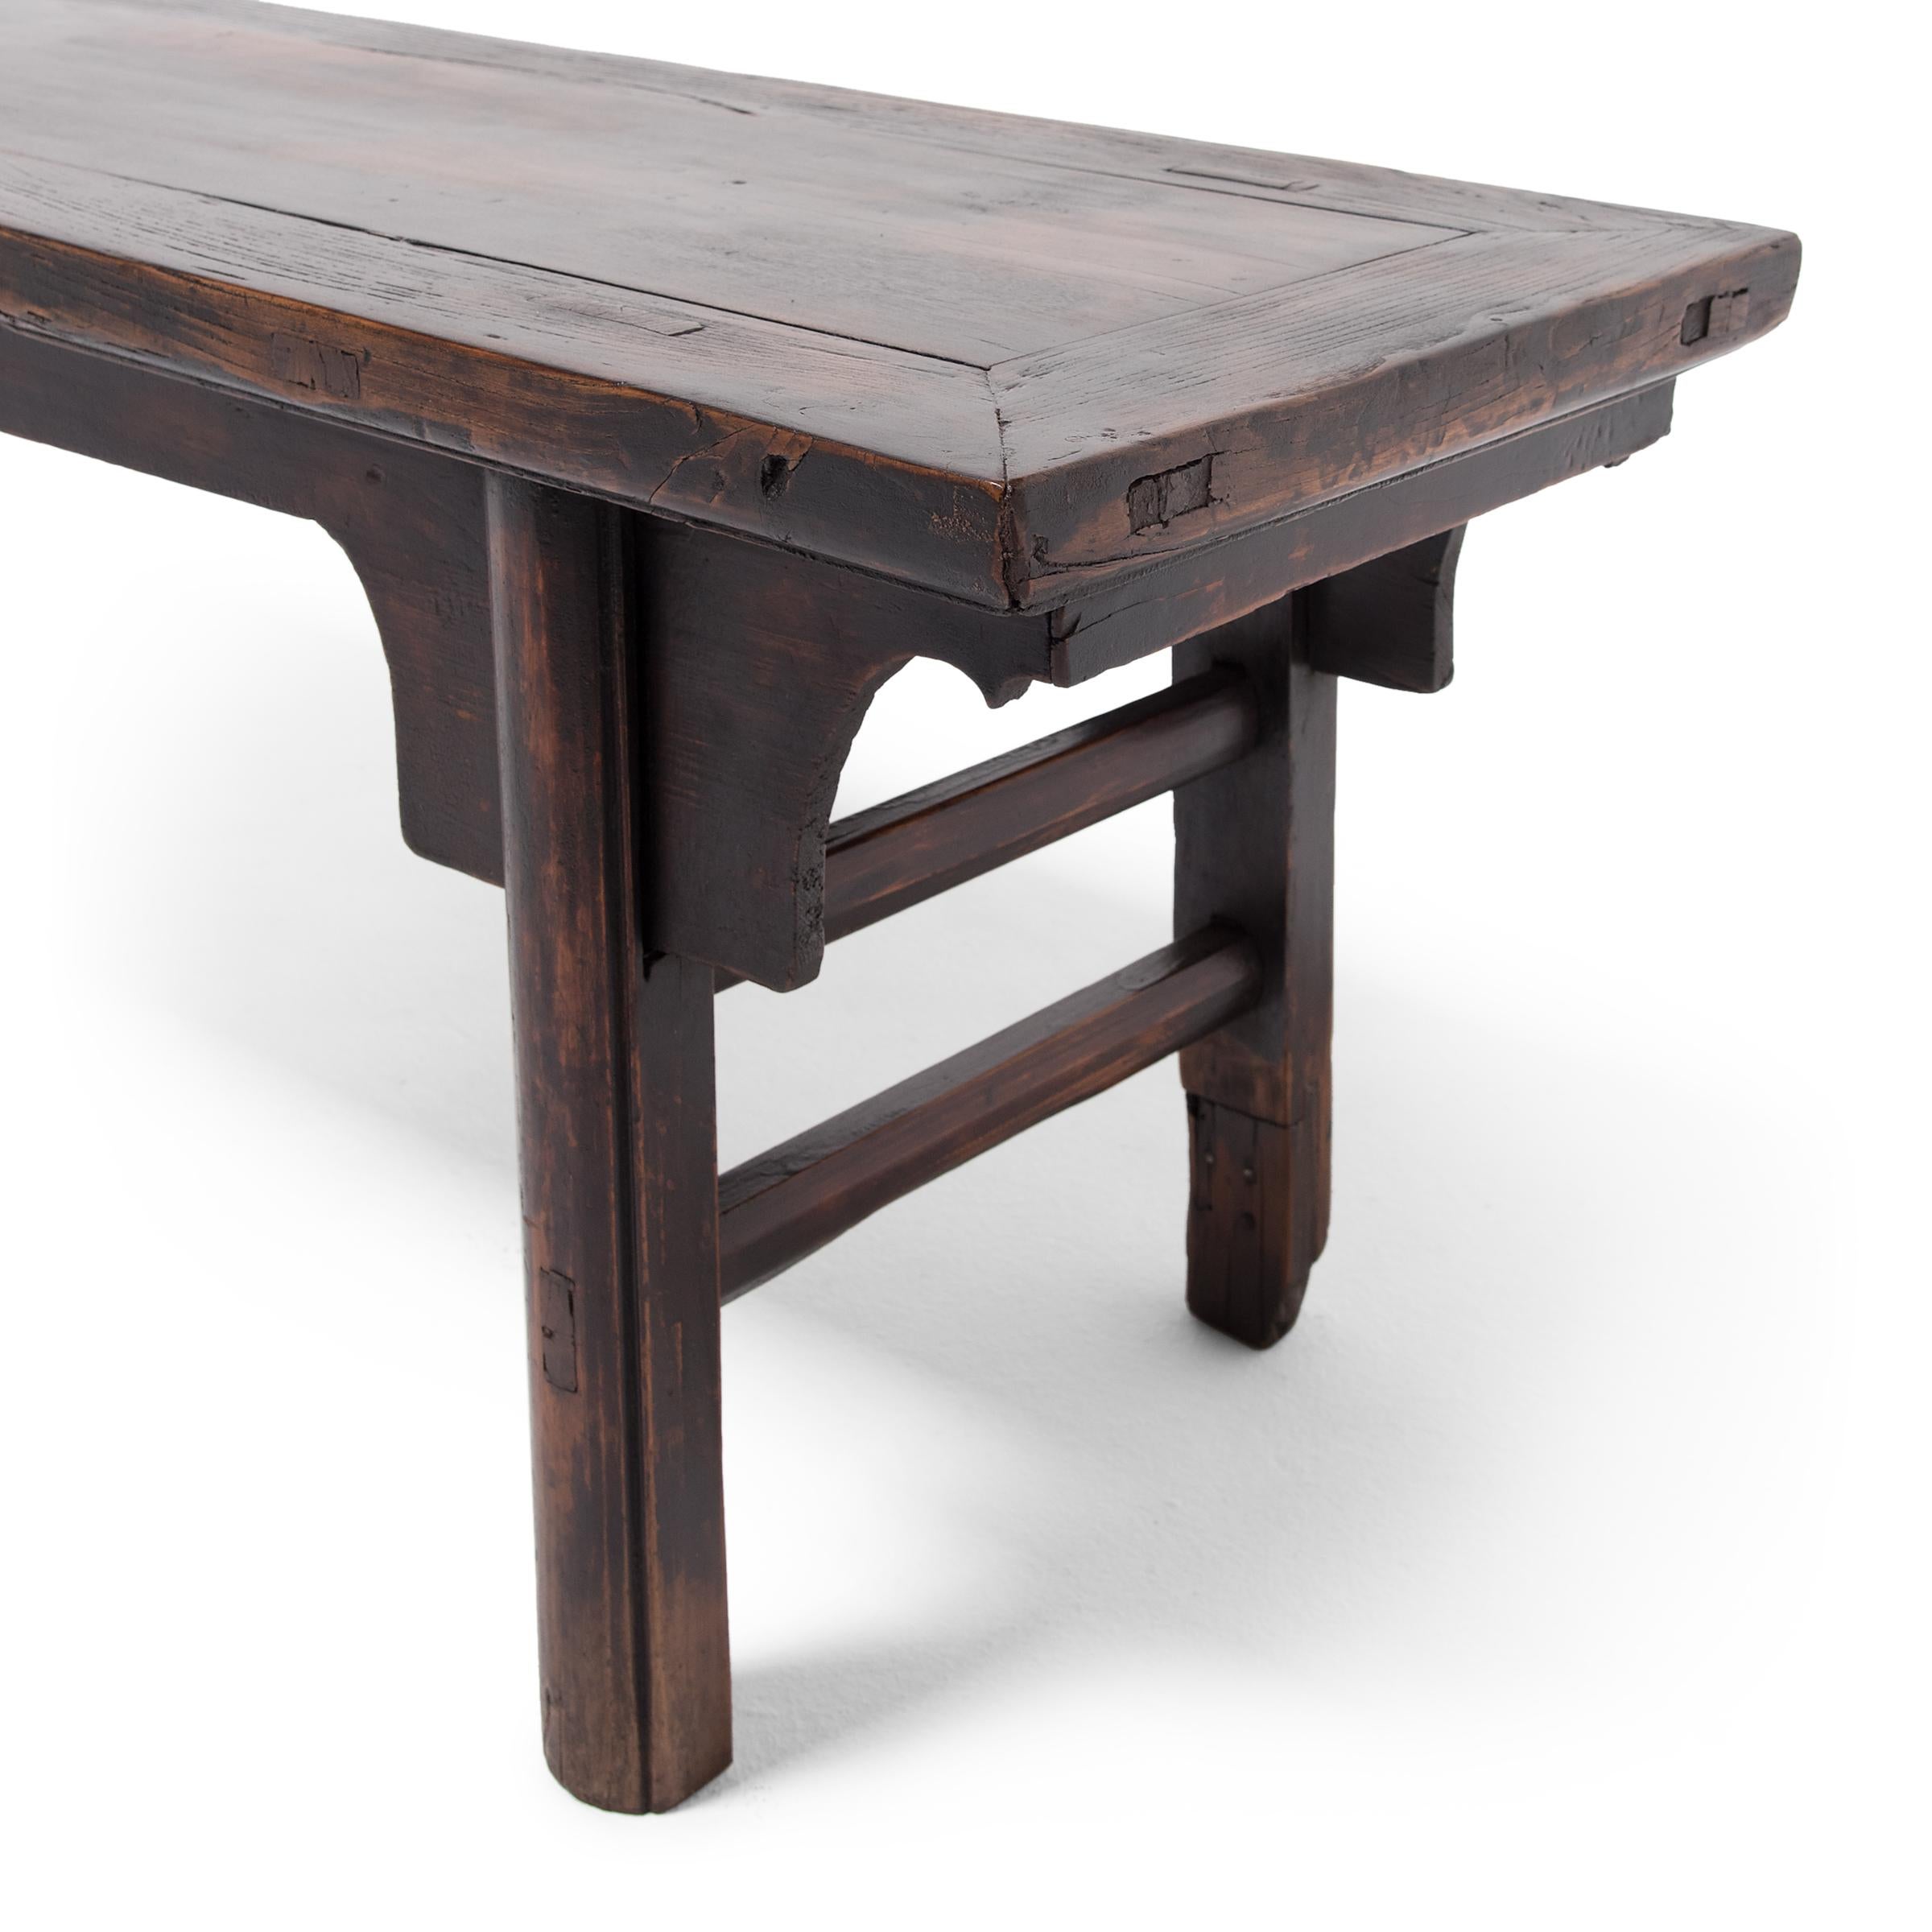 Elm Chinese Three Person Bench, c. 1900